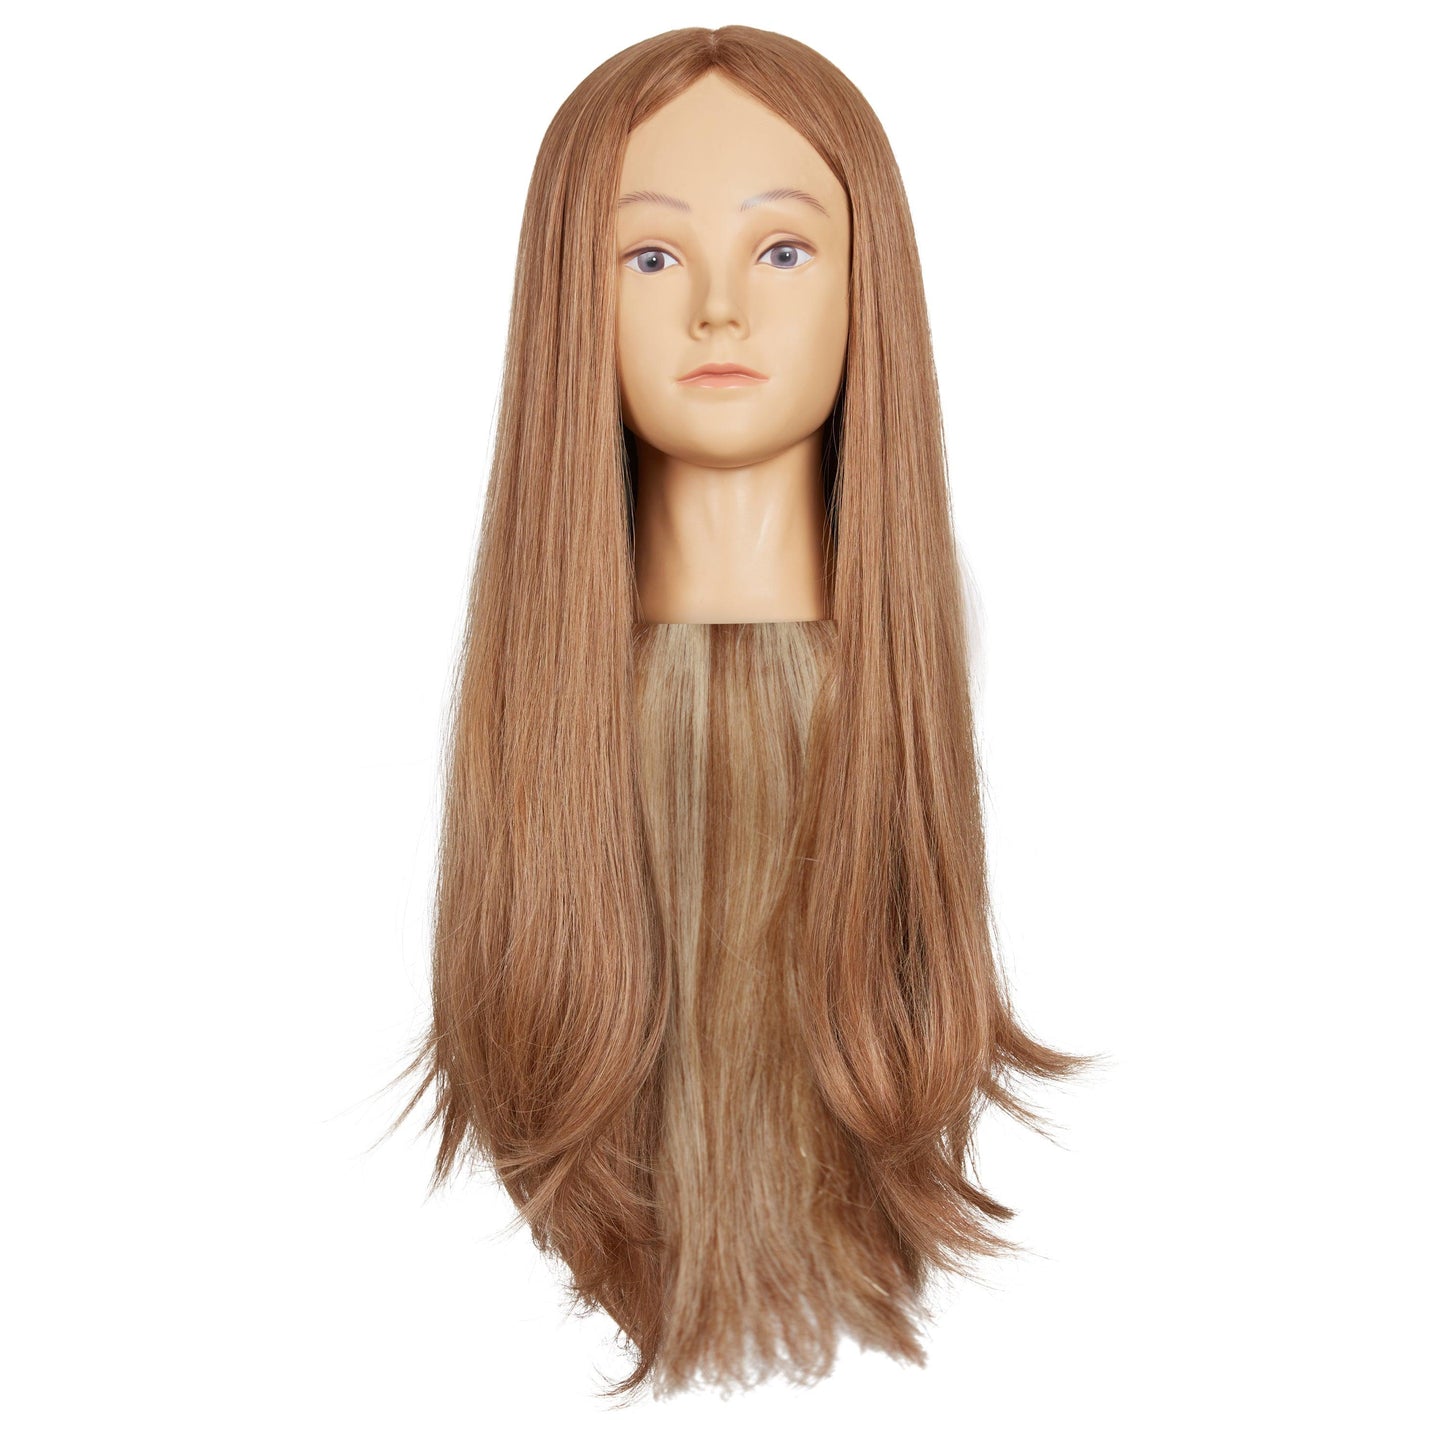 #16-10 DIRTY BLONDE SILK FRENCH TOP WIGS